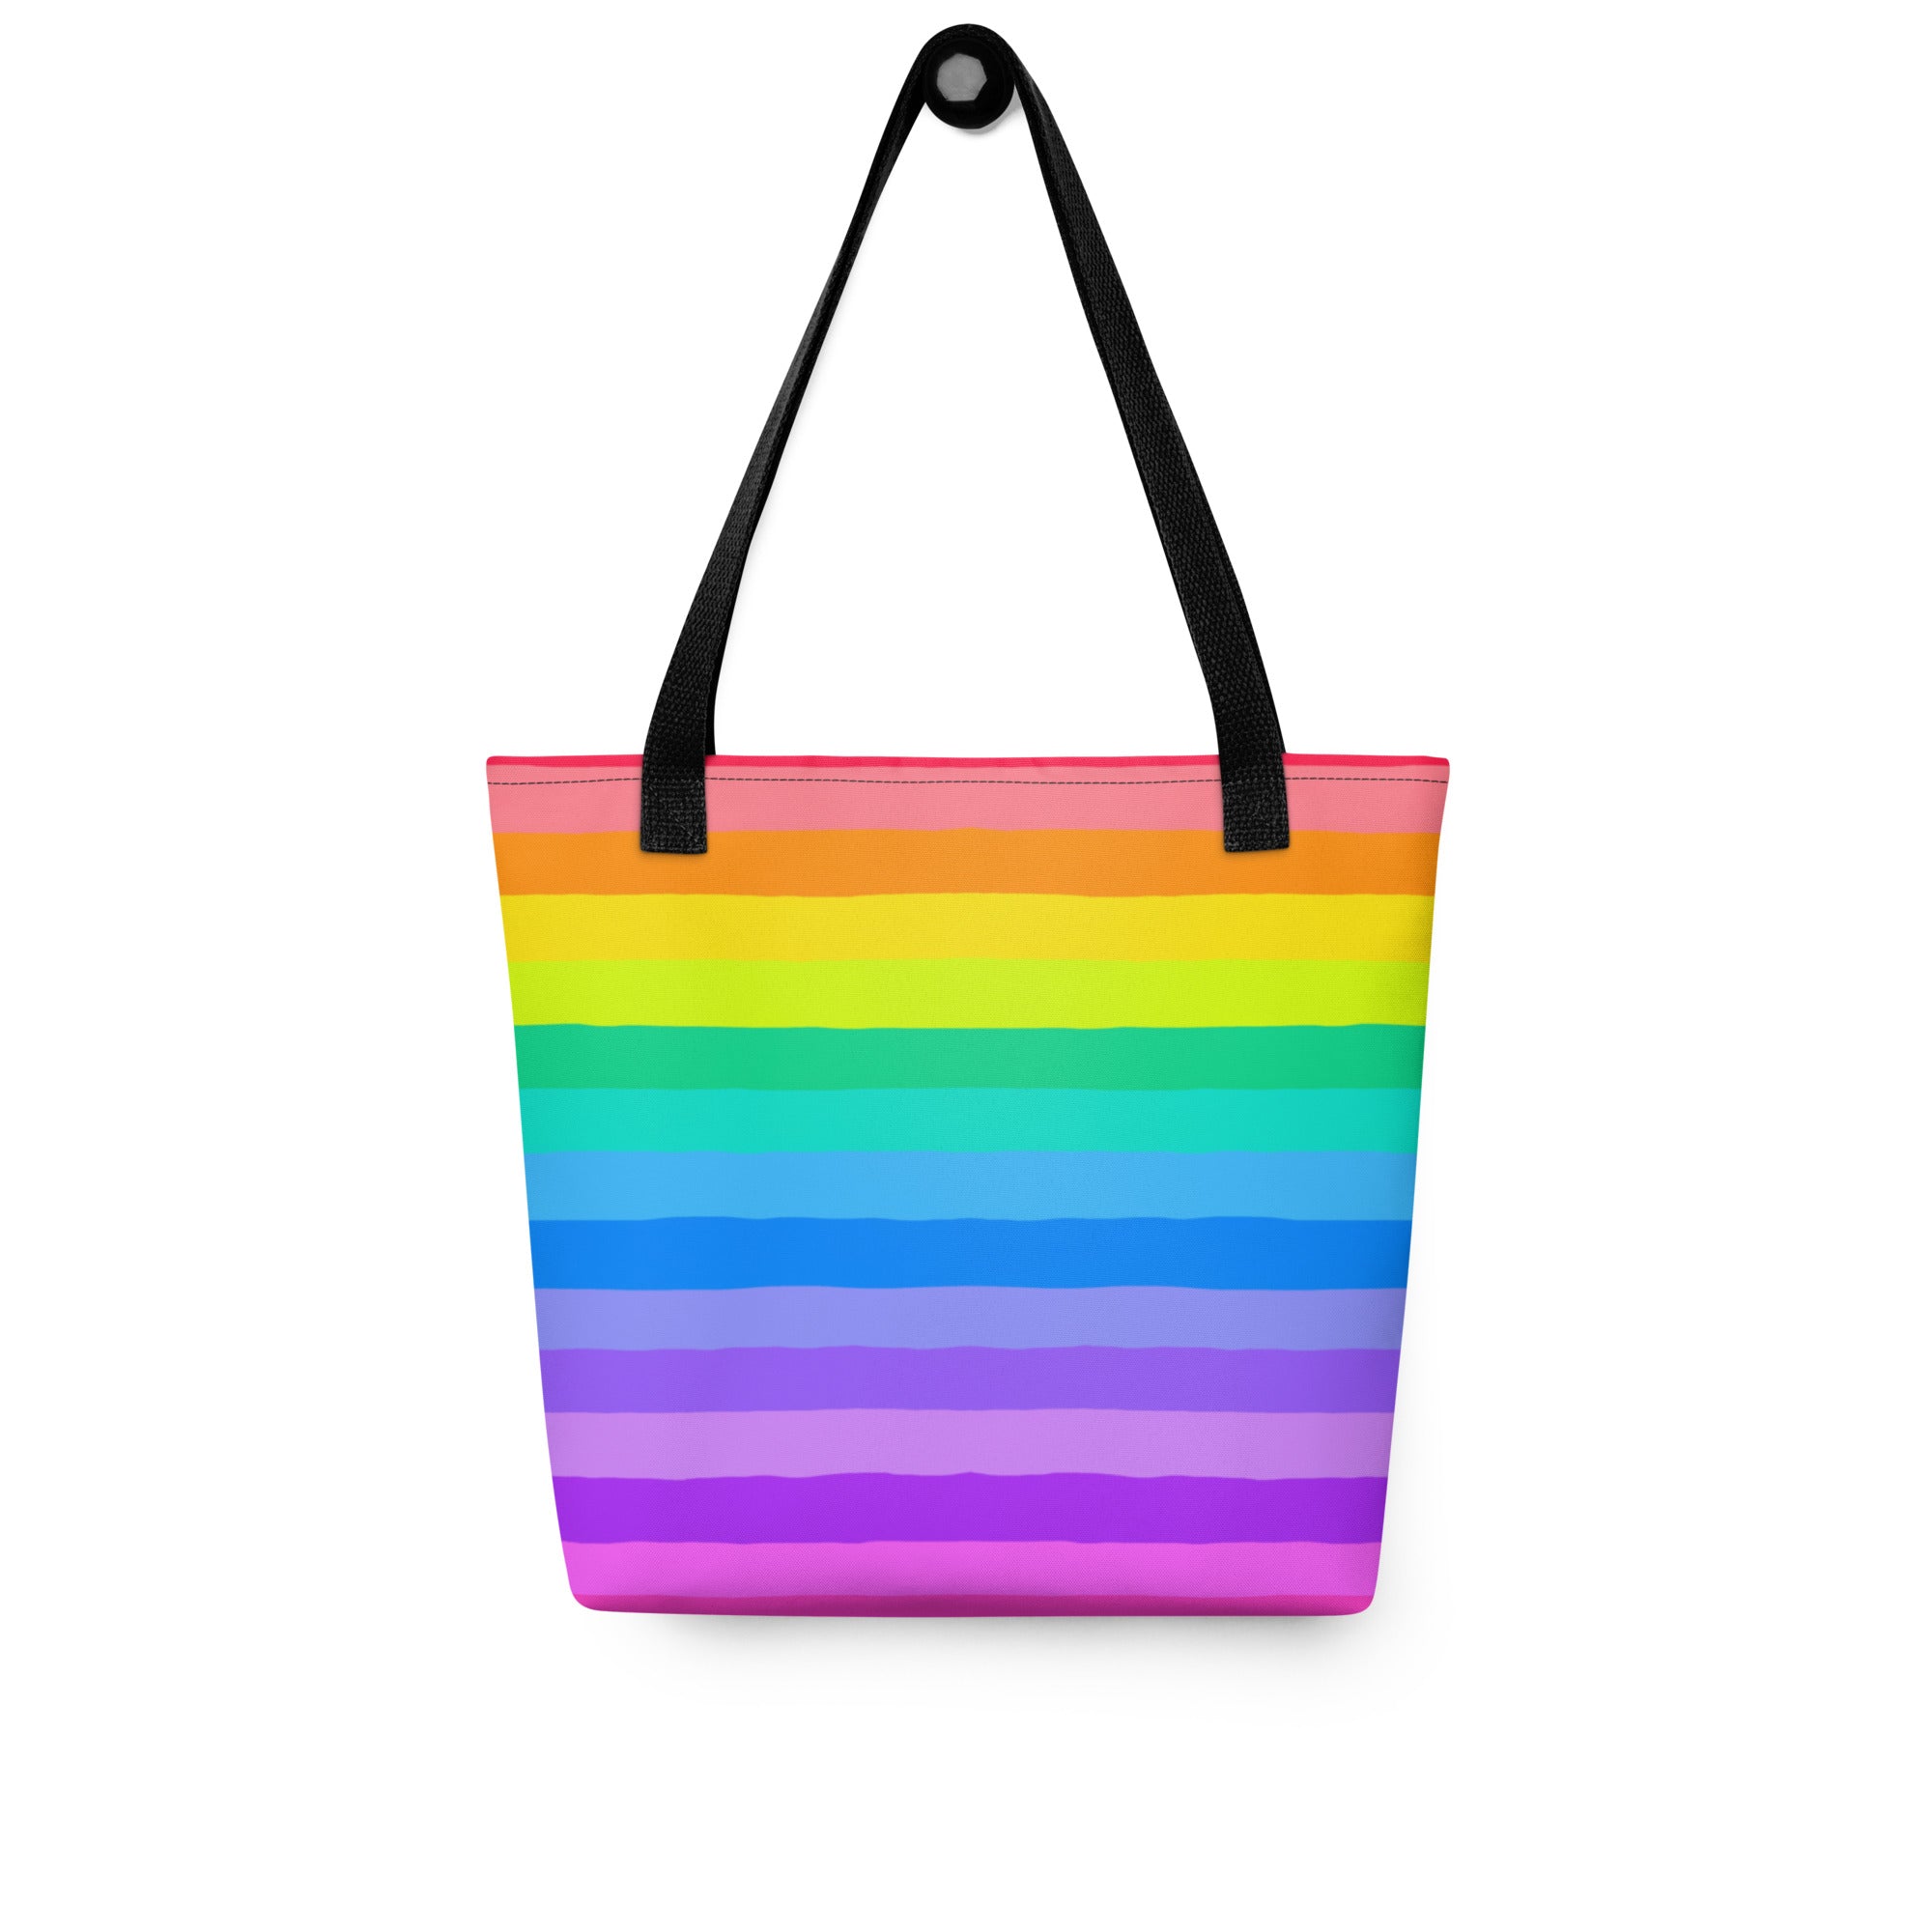 Happy Rainbow Tote Bag – a rainbow in your cloud